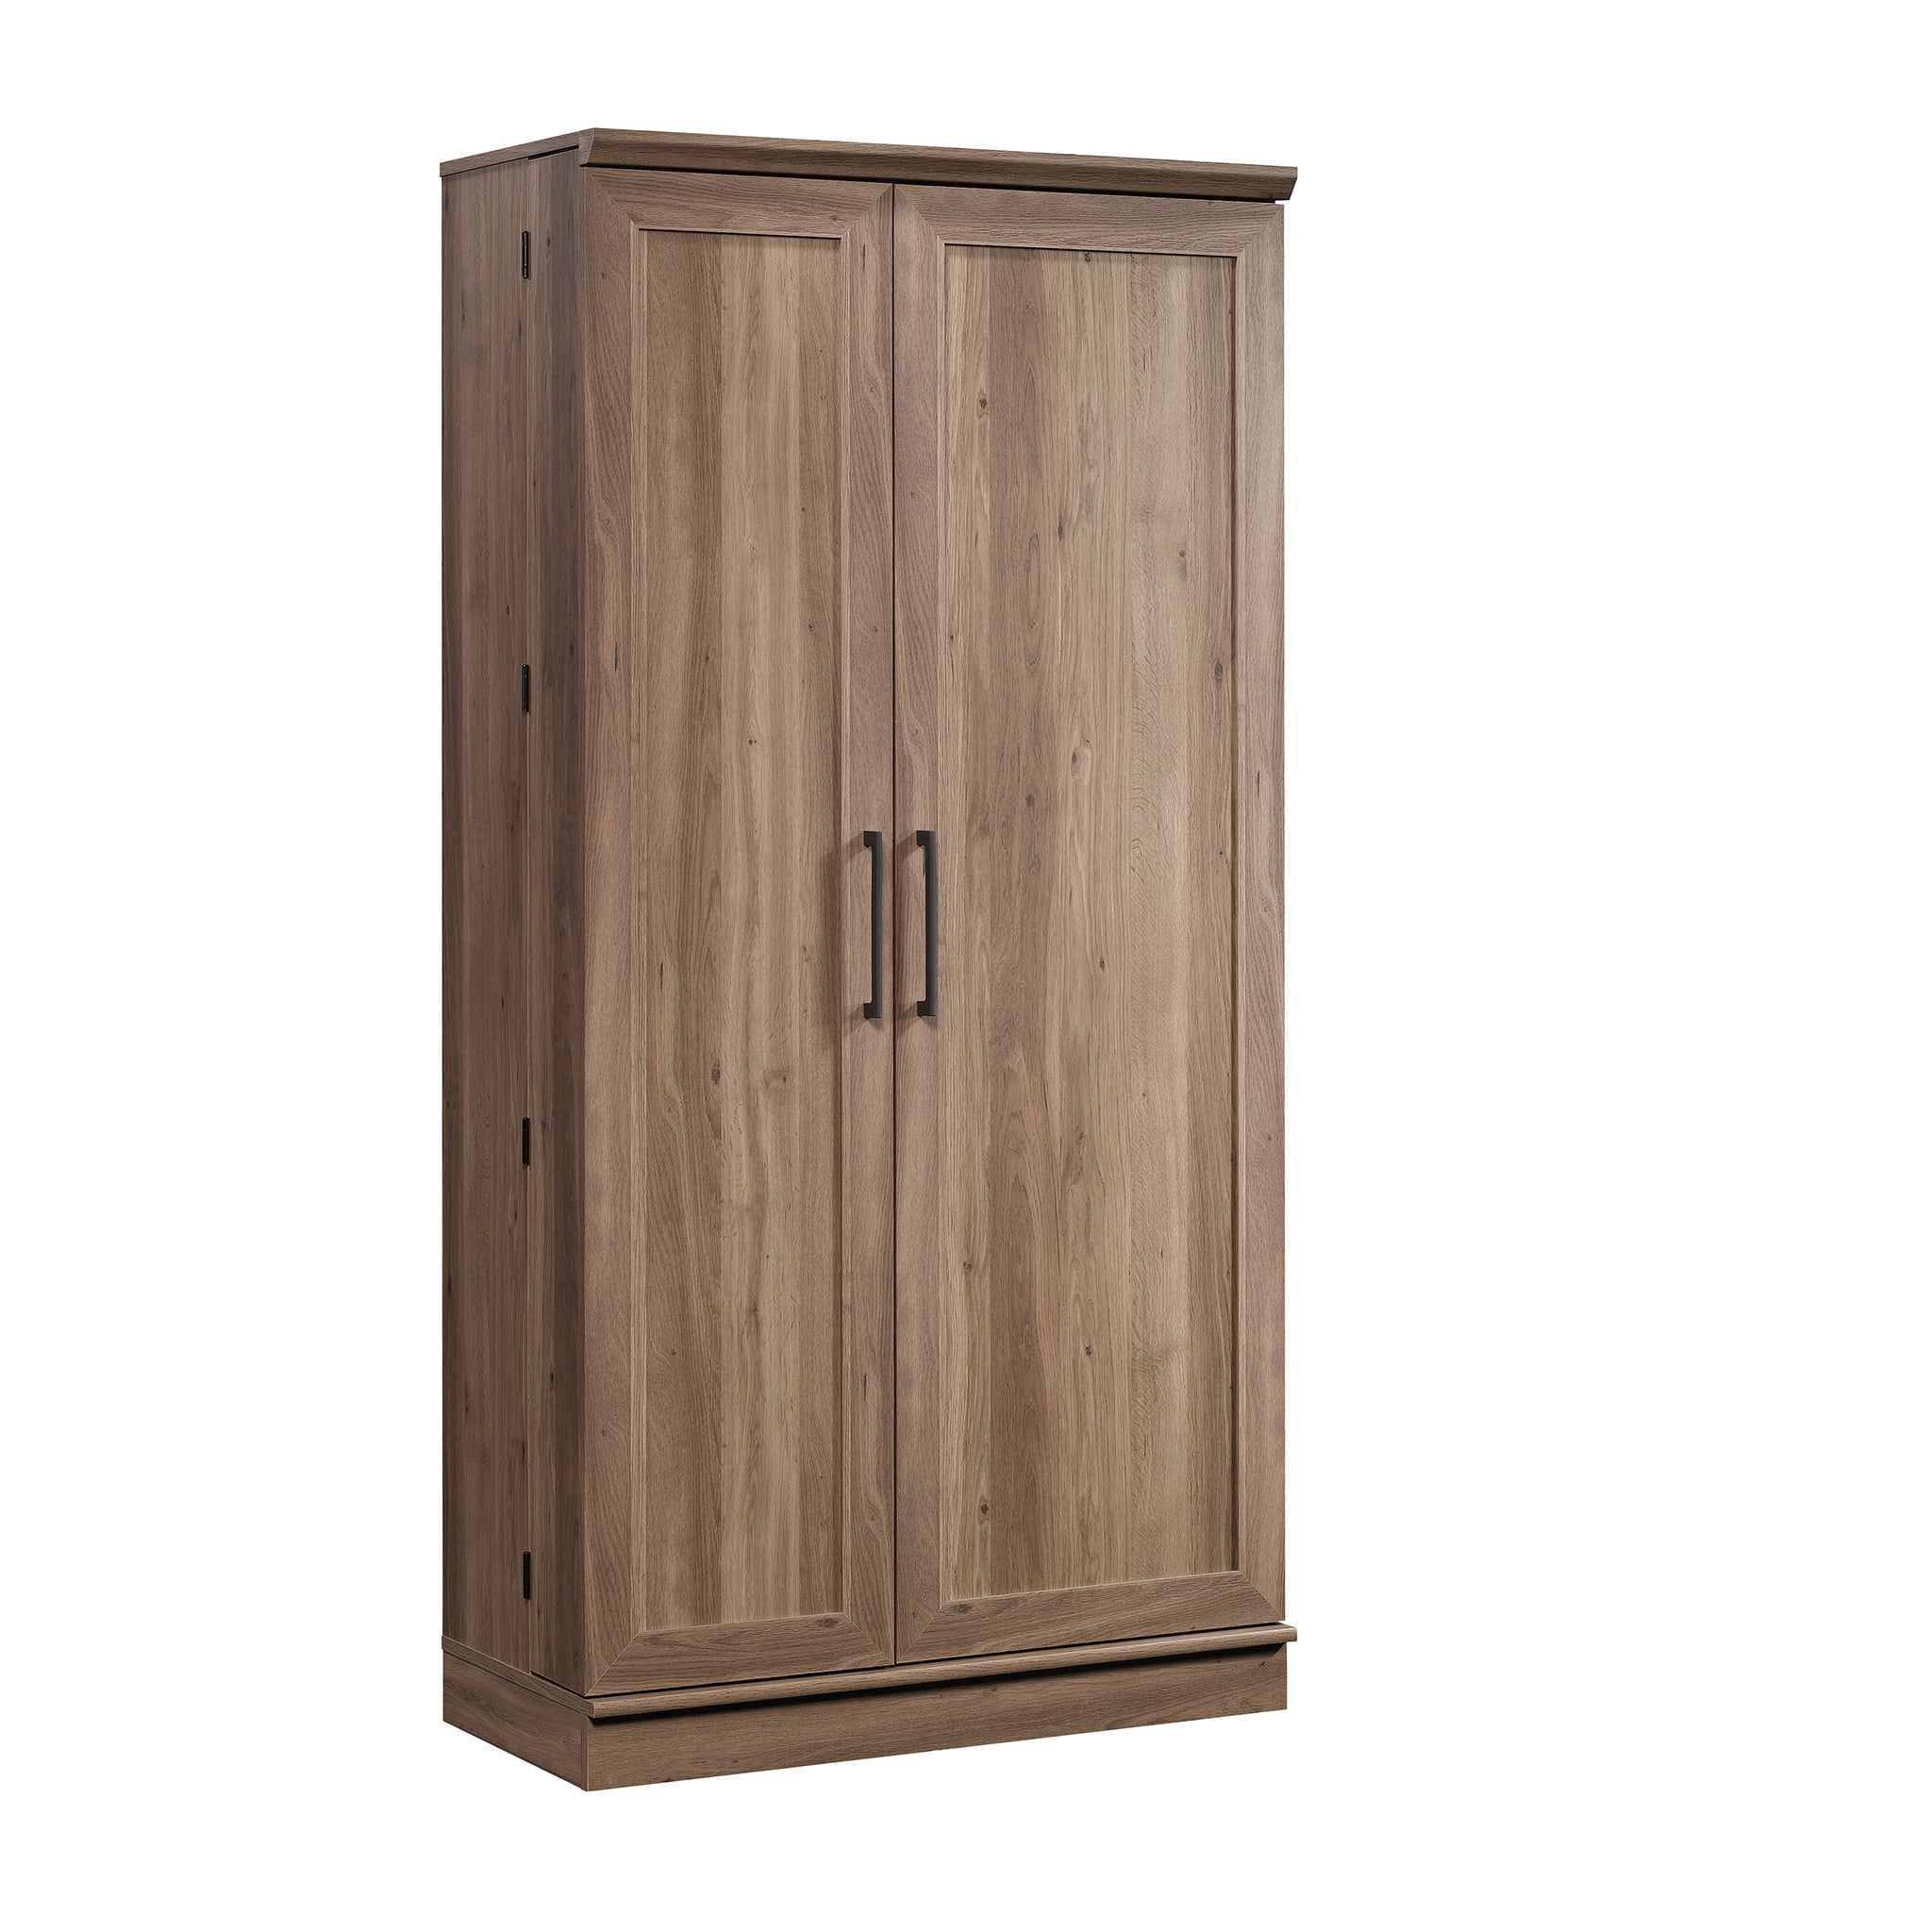 Shop our Spring Maple Two-Door Storage Cabinet by Sauder